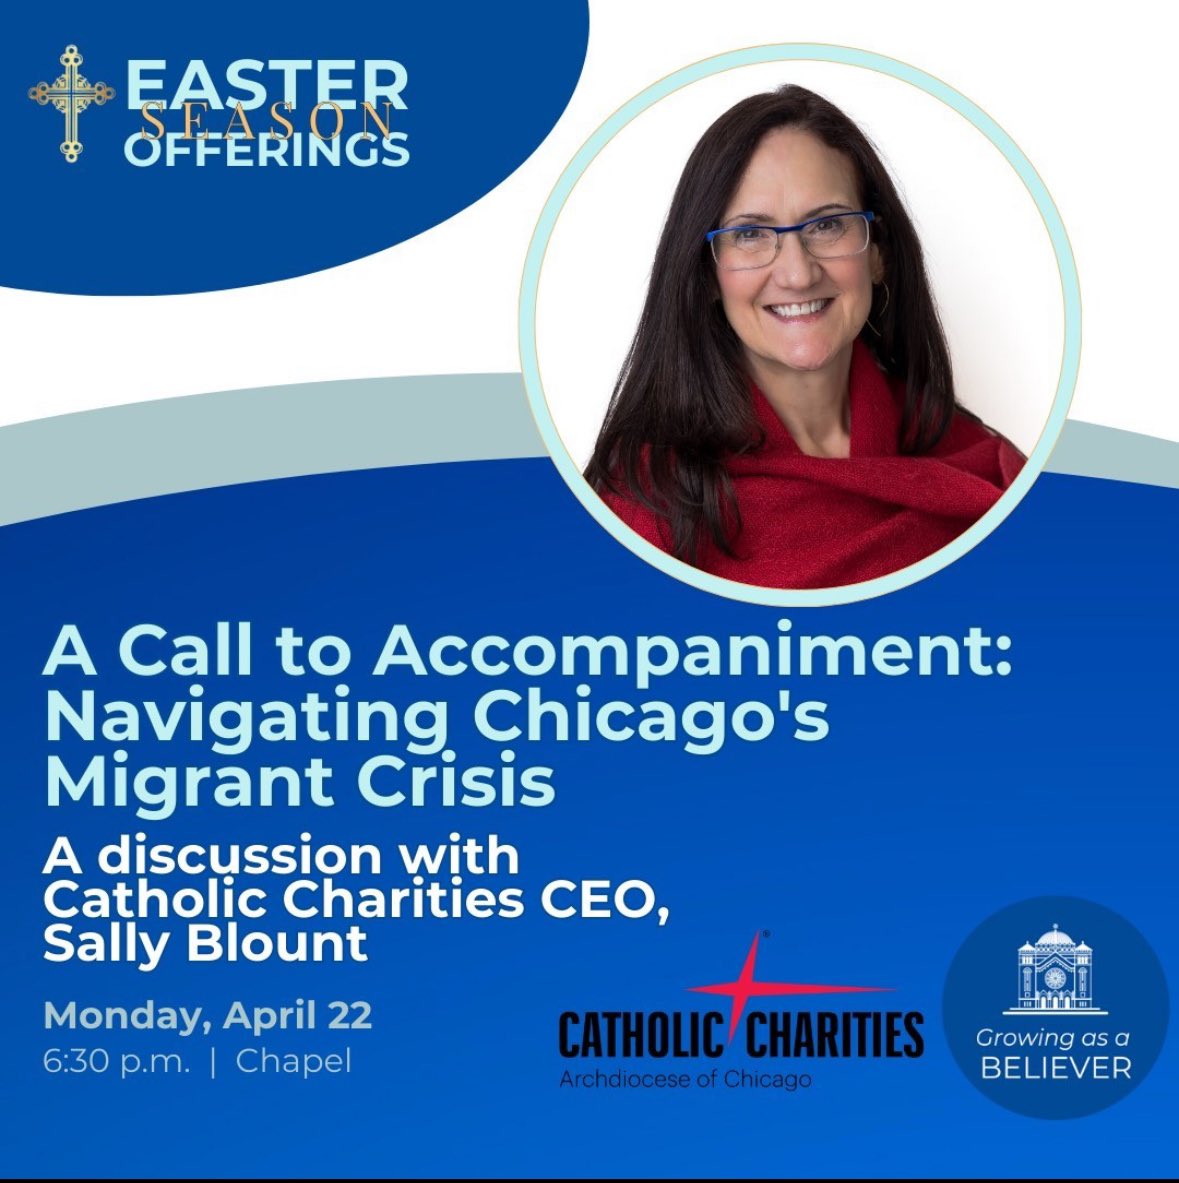 Join us this Easter season in learning about the difference the Catholic community makes throughout the city in service those in need through @CCofChicago visit clement.org to register!